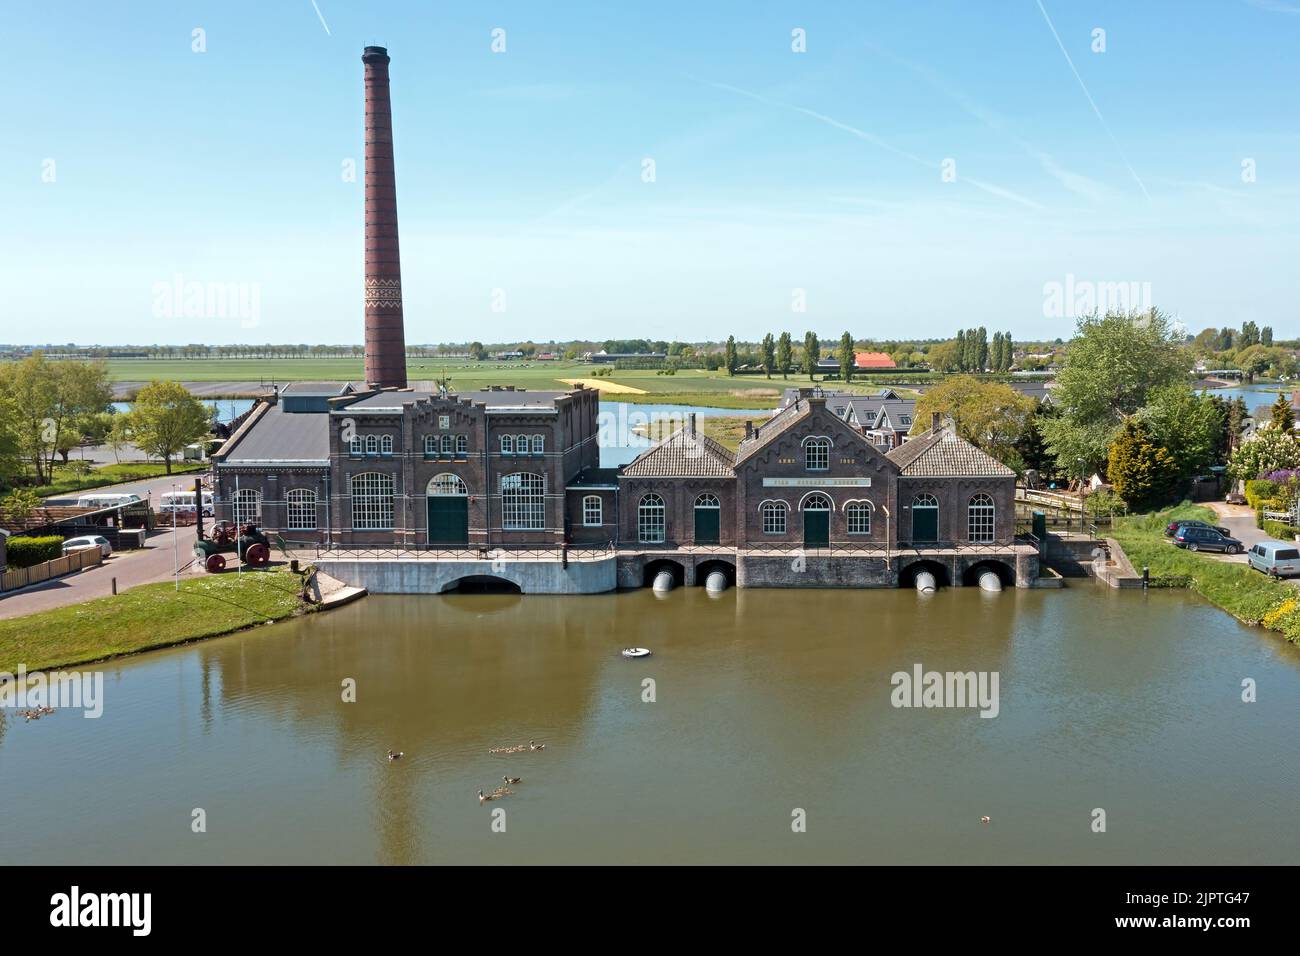 Aerial from the steam pumping station Vier Noorder Koggen in Wervershoof in the Netherlands Stock Photo